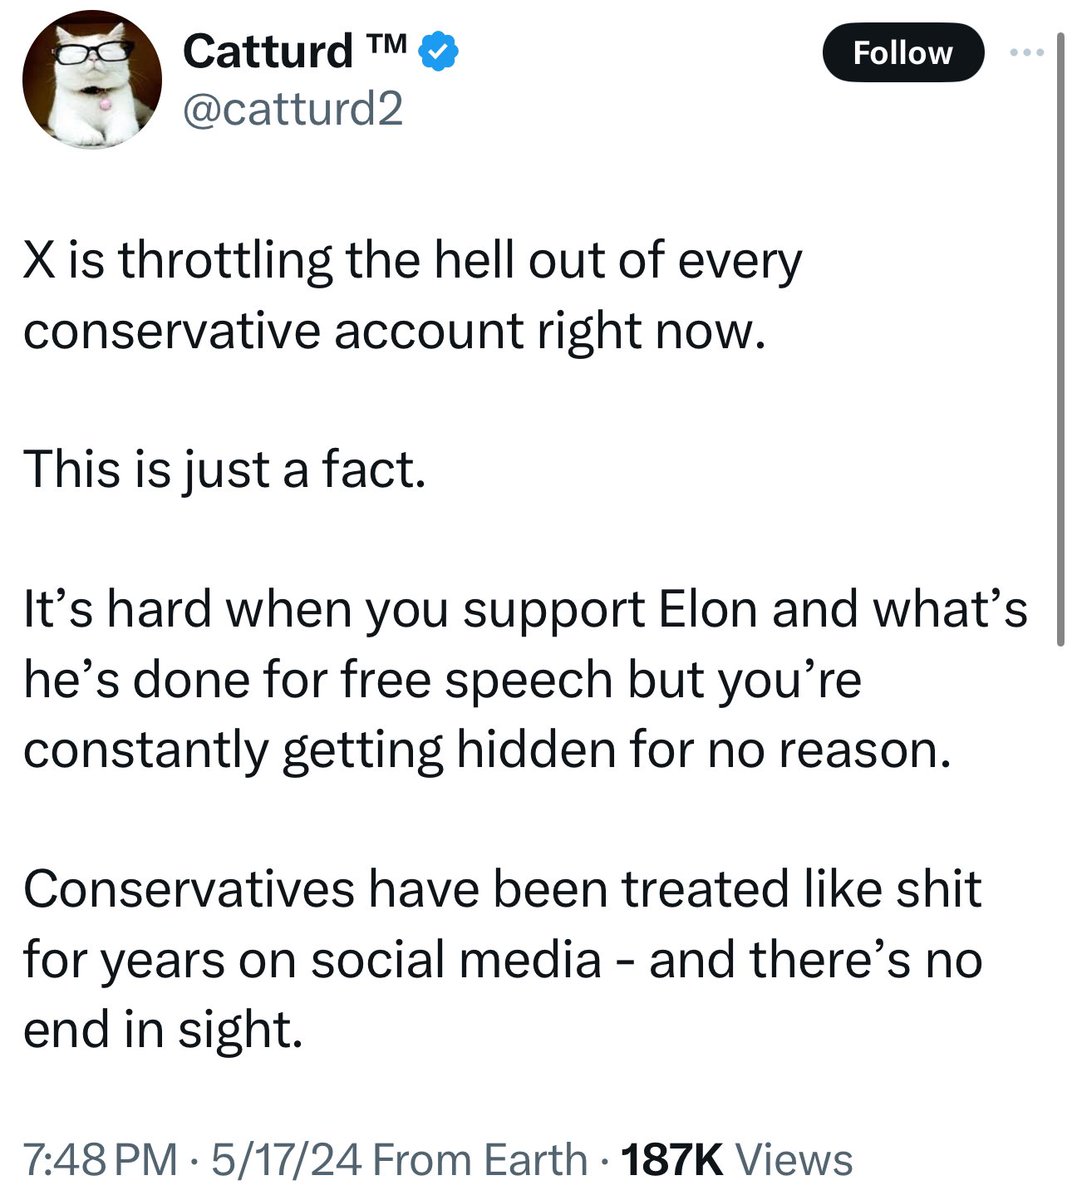 Conservatives are not being throttled on X. Catturd’s constant demeaning and hideous insults of Taylor Swift are simply uninteresting so most people tuned out. This is just a fact.